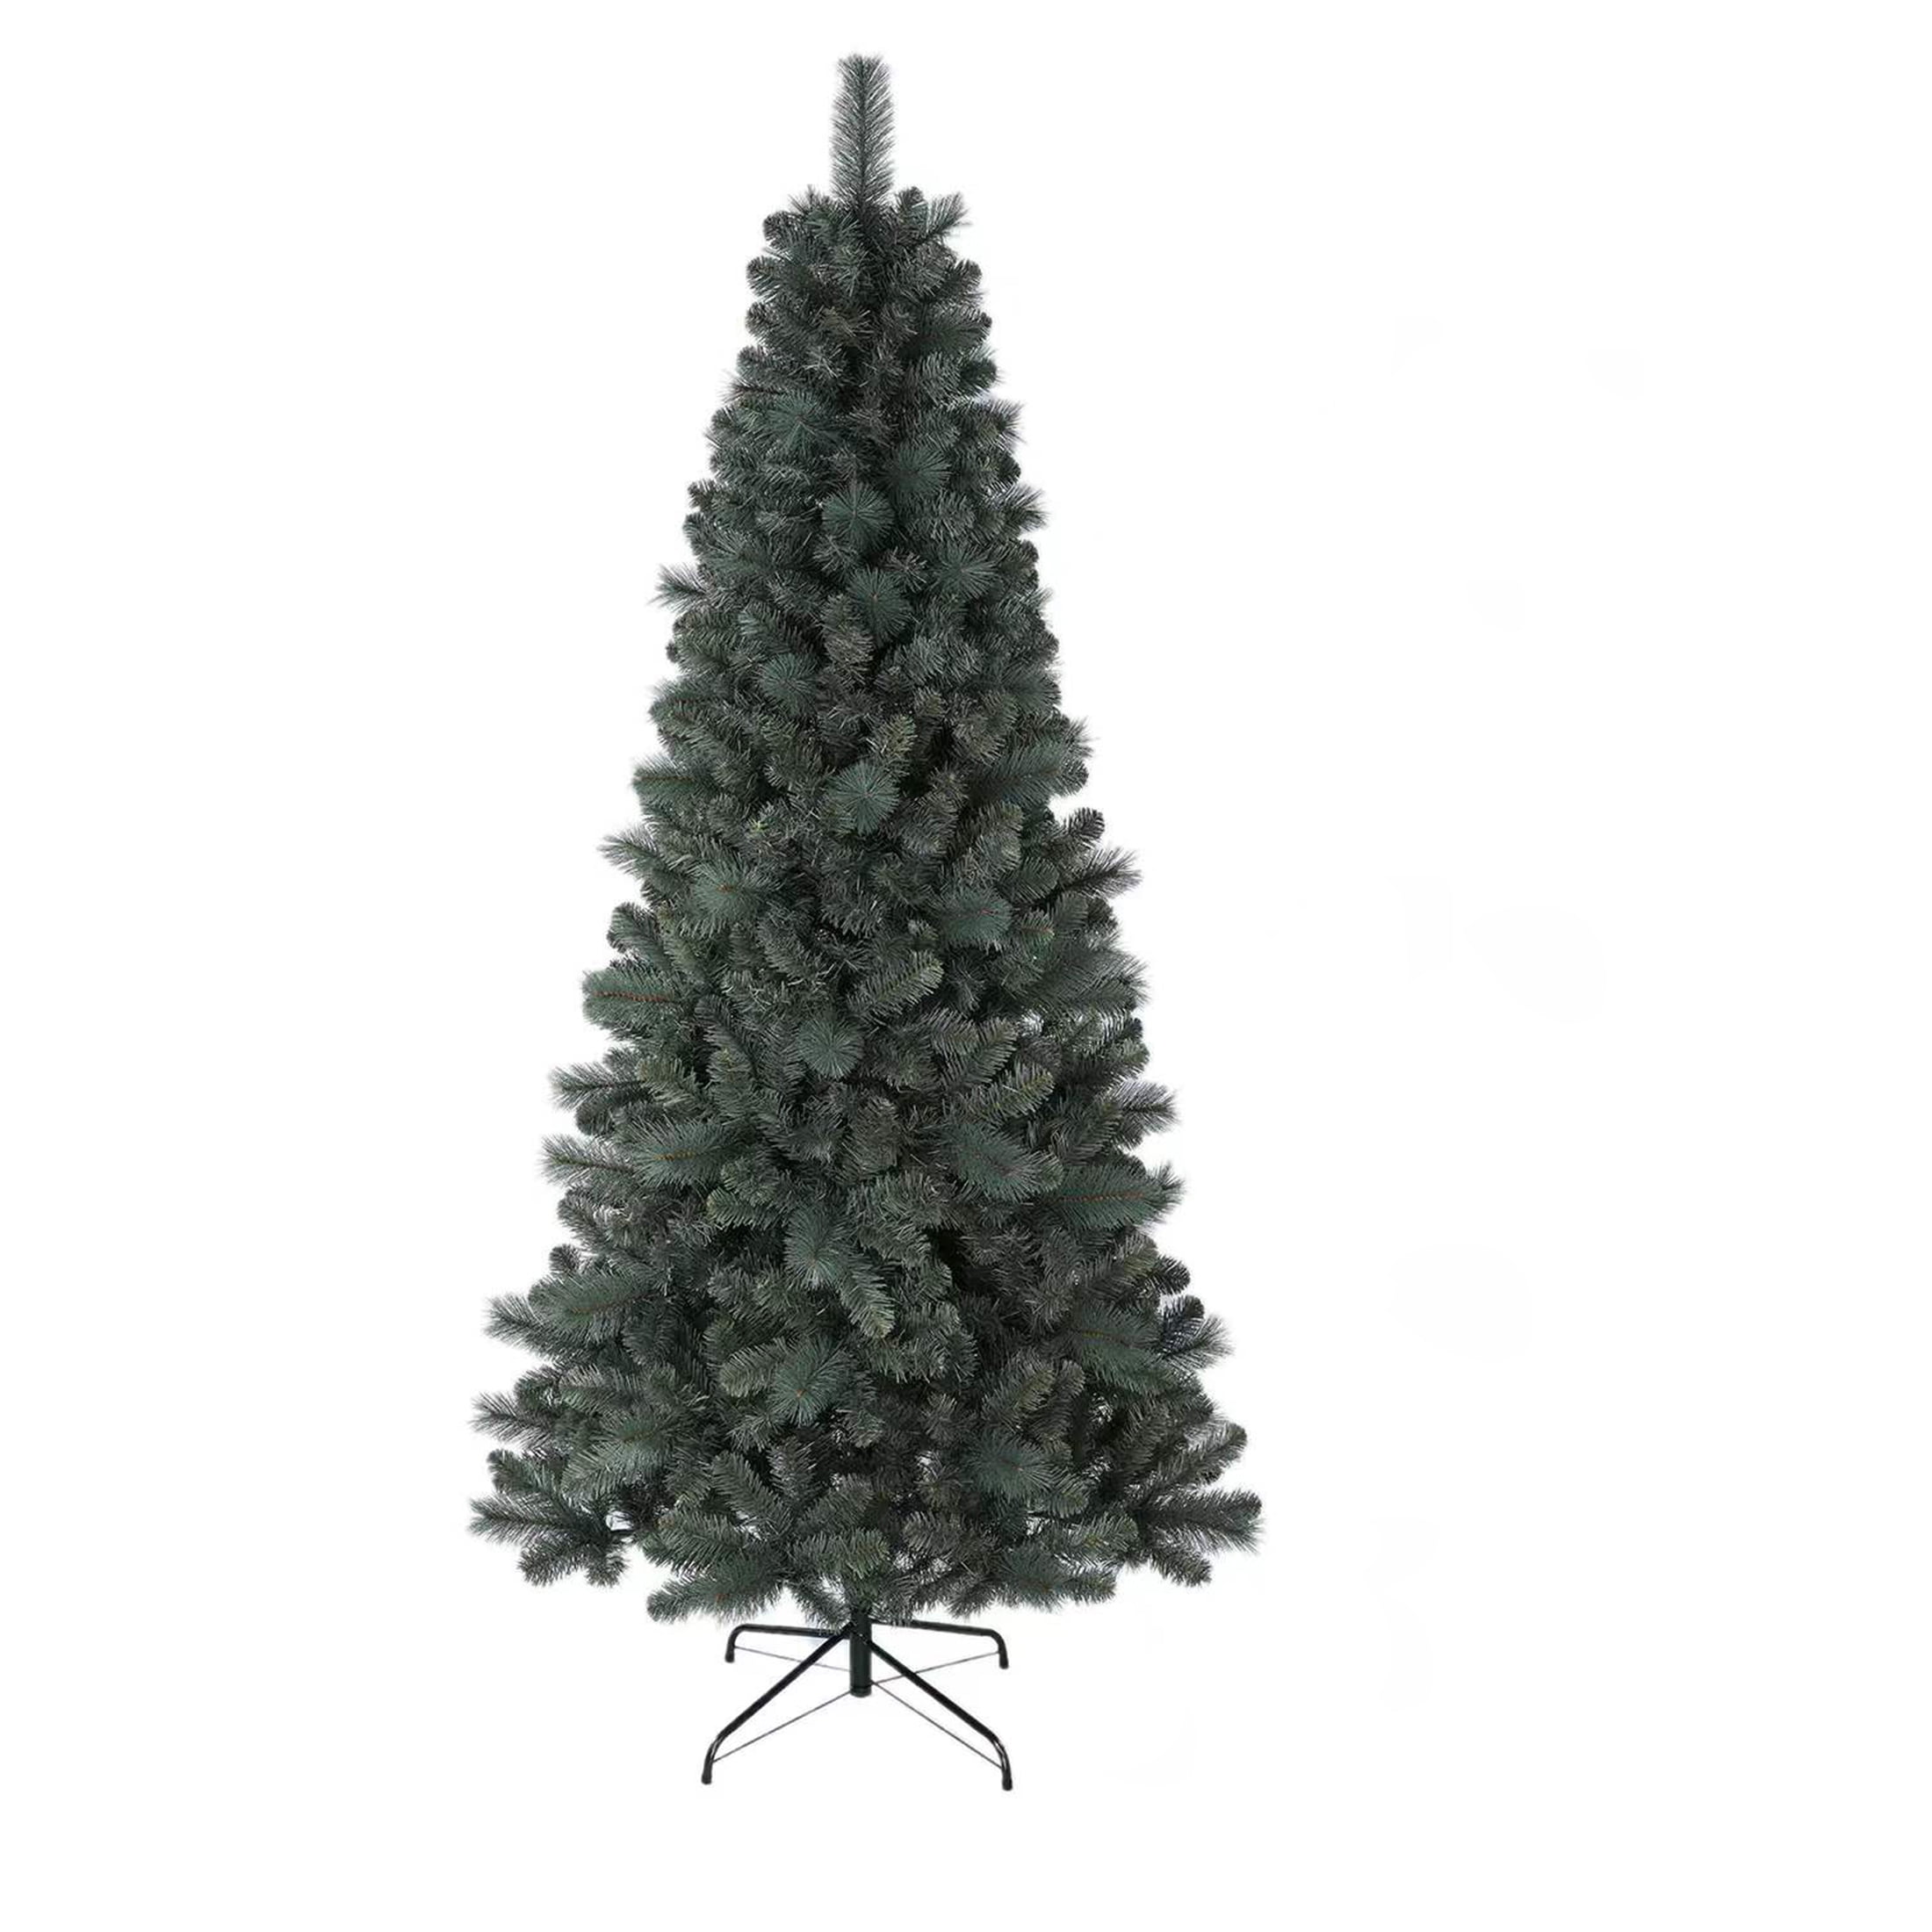 Ournal Holiday Time 7-Foot Un-Lit Artificial Stanford Spruce Christmas Tree, with Tree Stand